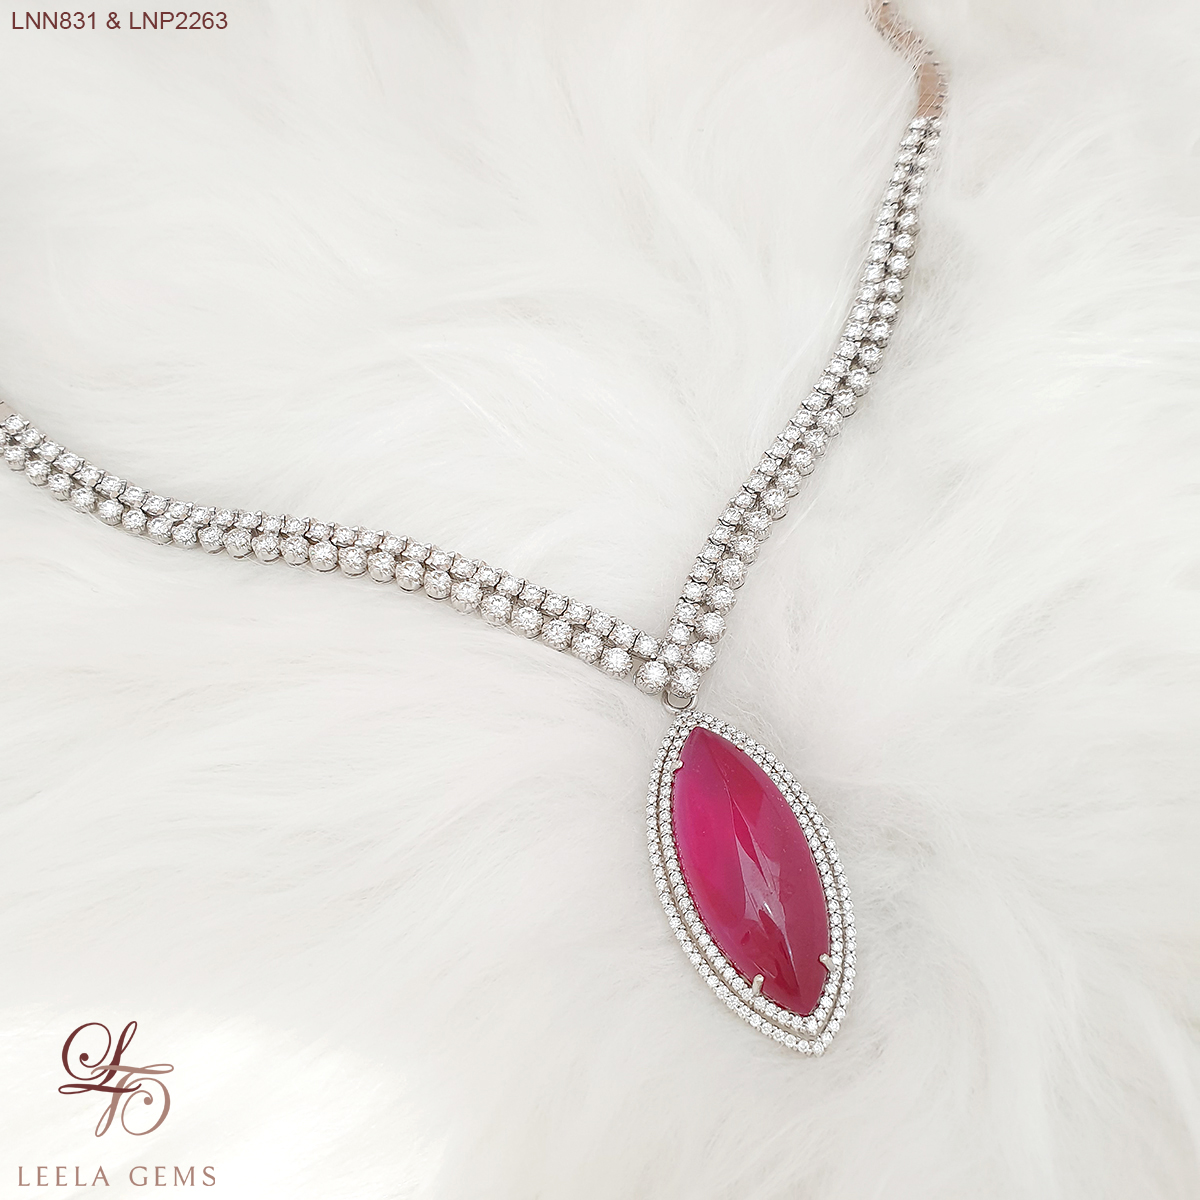 Diamond Necklace with ruby pendant